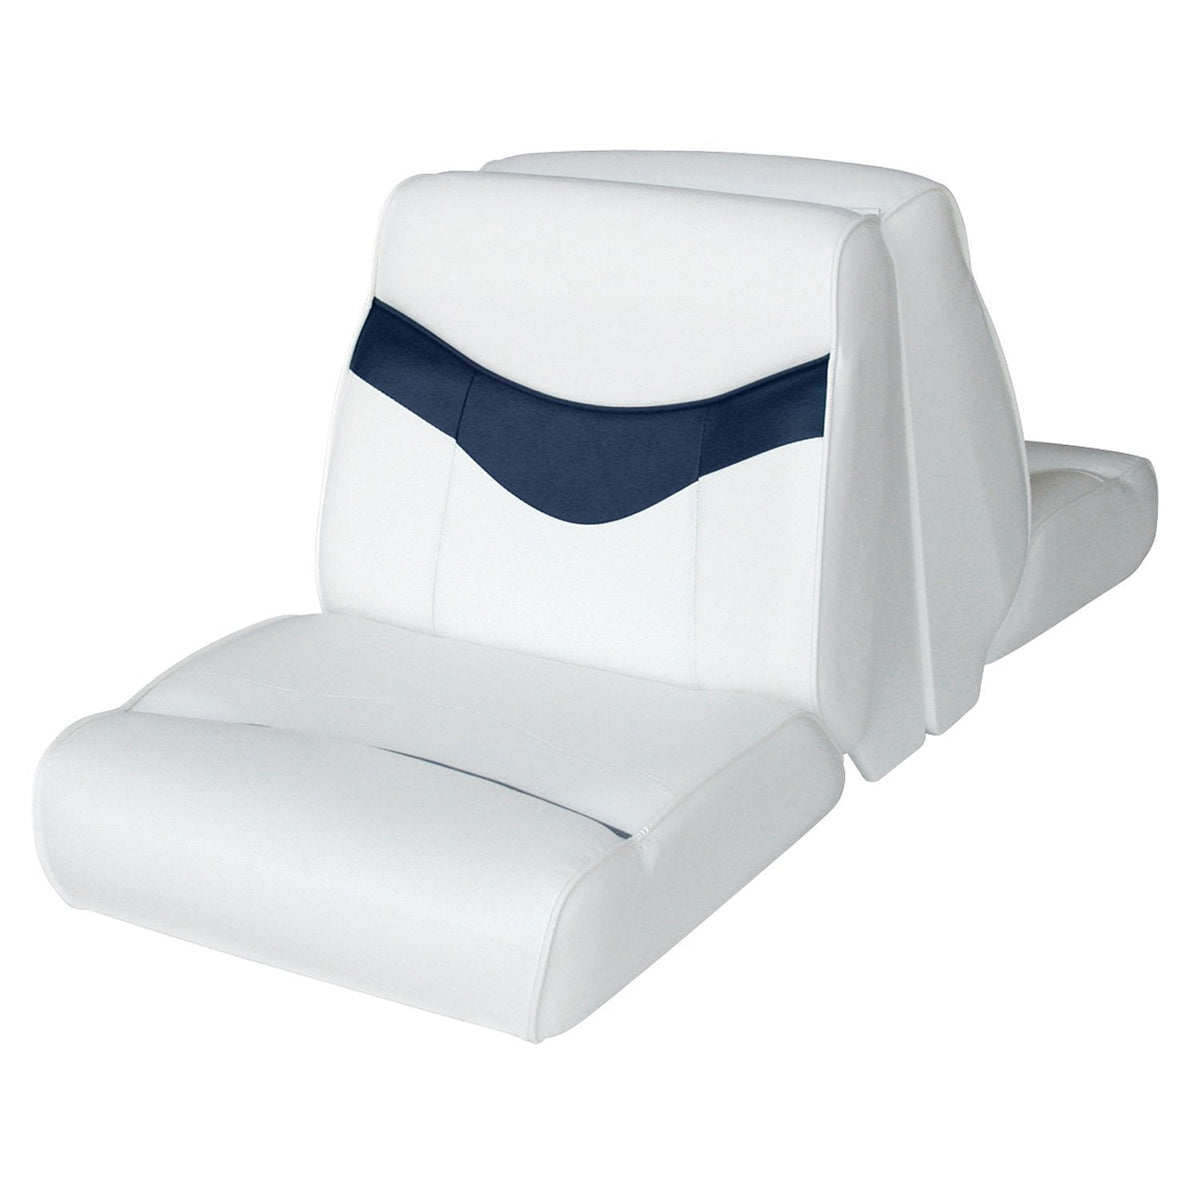 Wise Not Qualified for Free Shipping Wise Lounge Seat Top Only White/Blue #8WD1173-0031